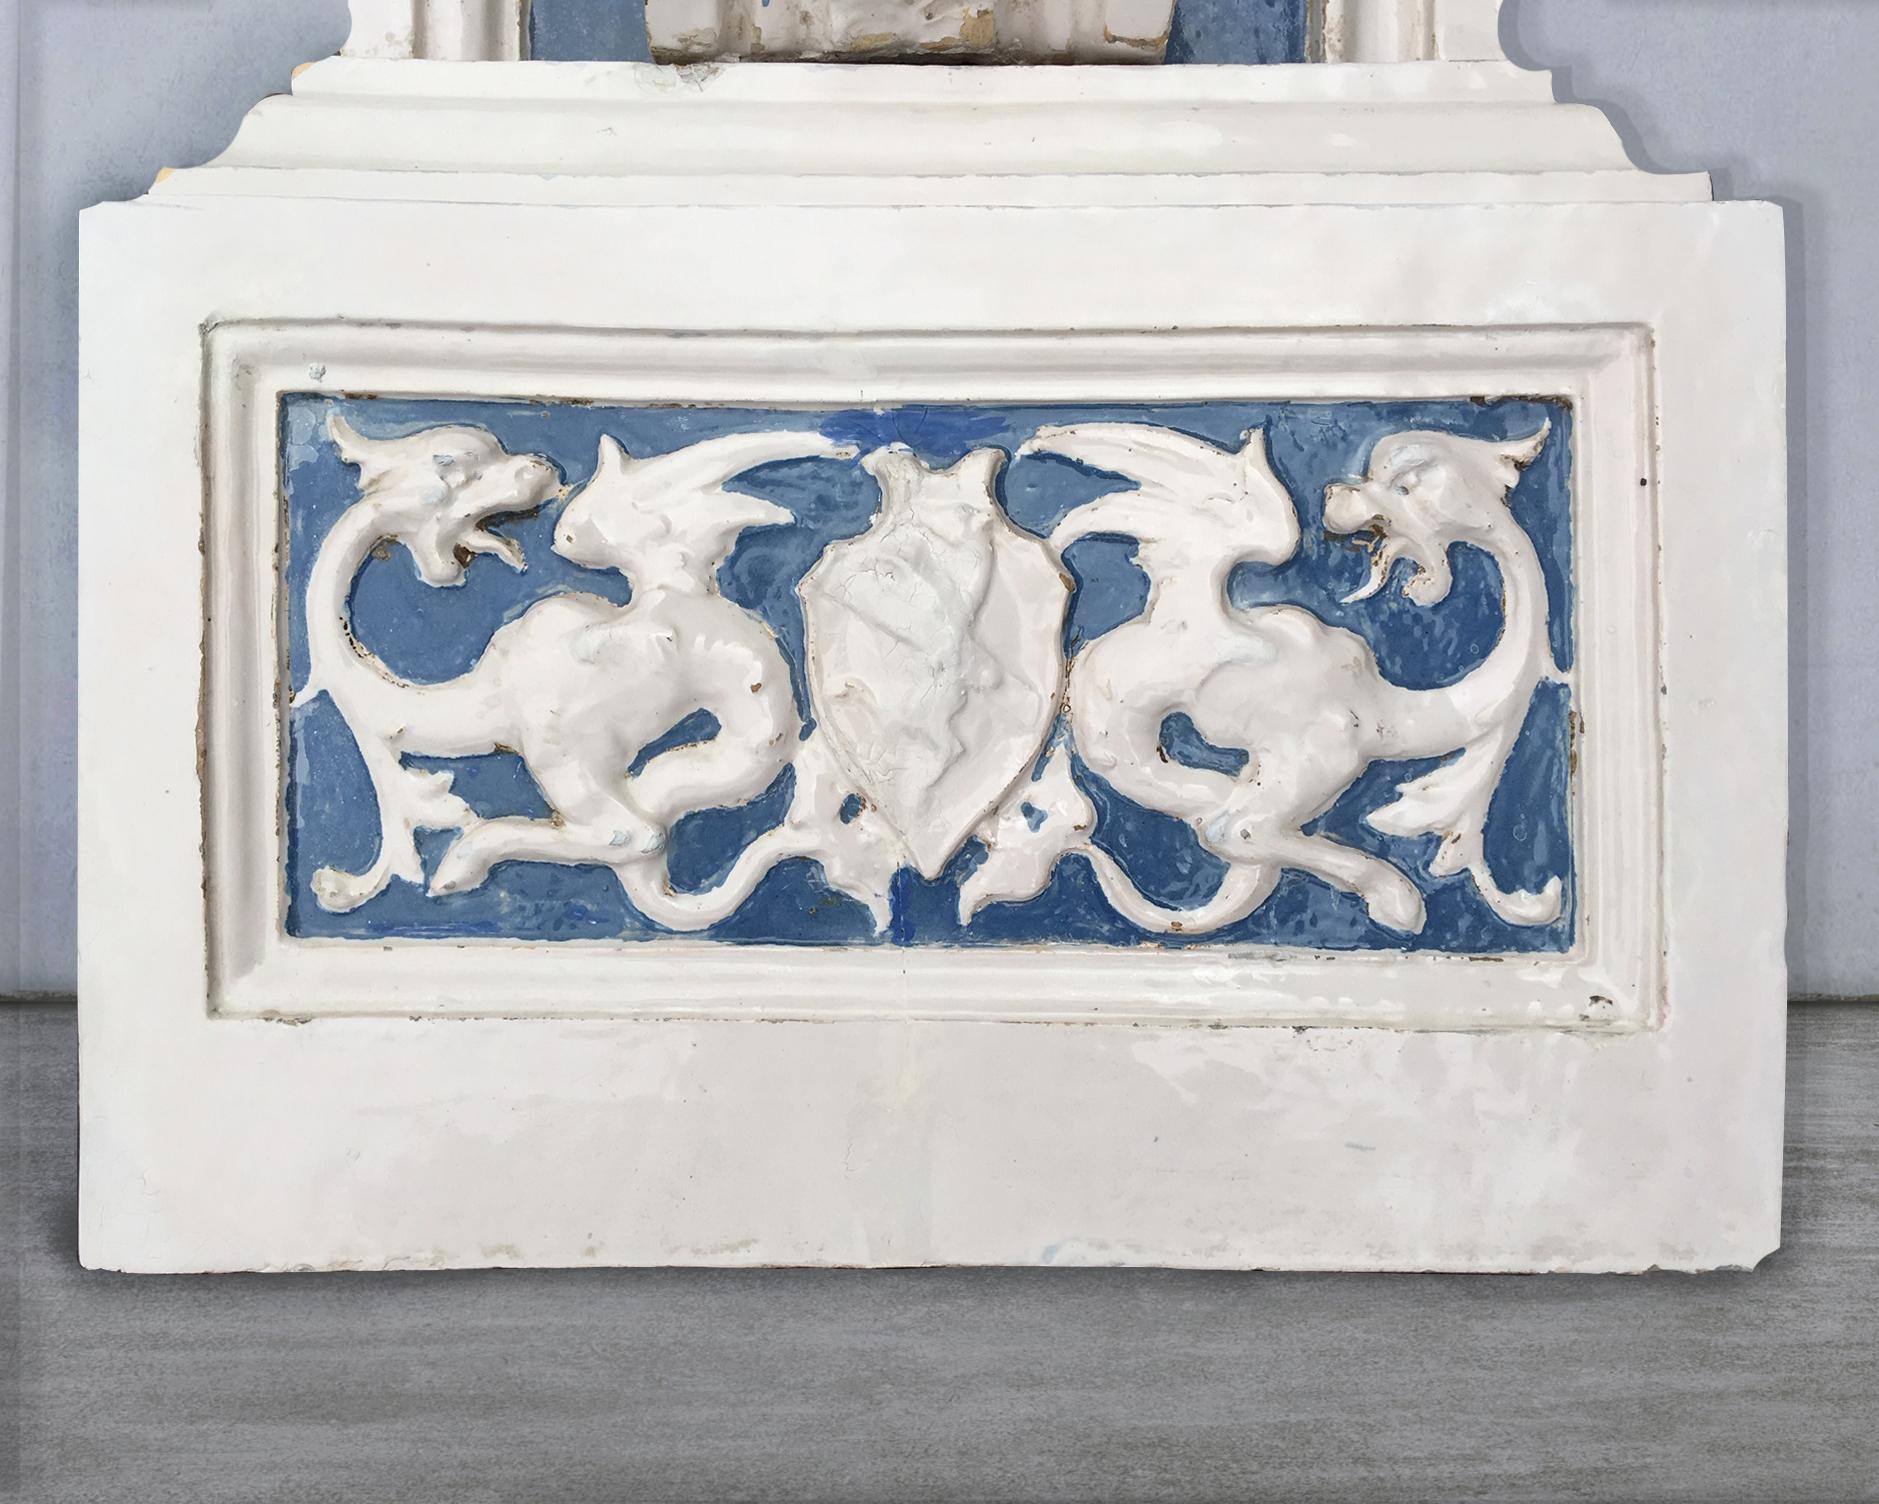 Italian Cantagalli Fireplace Della Robbia Style 19th Century Blue and White Pottery For Sale